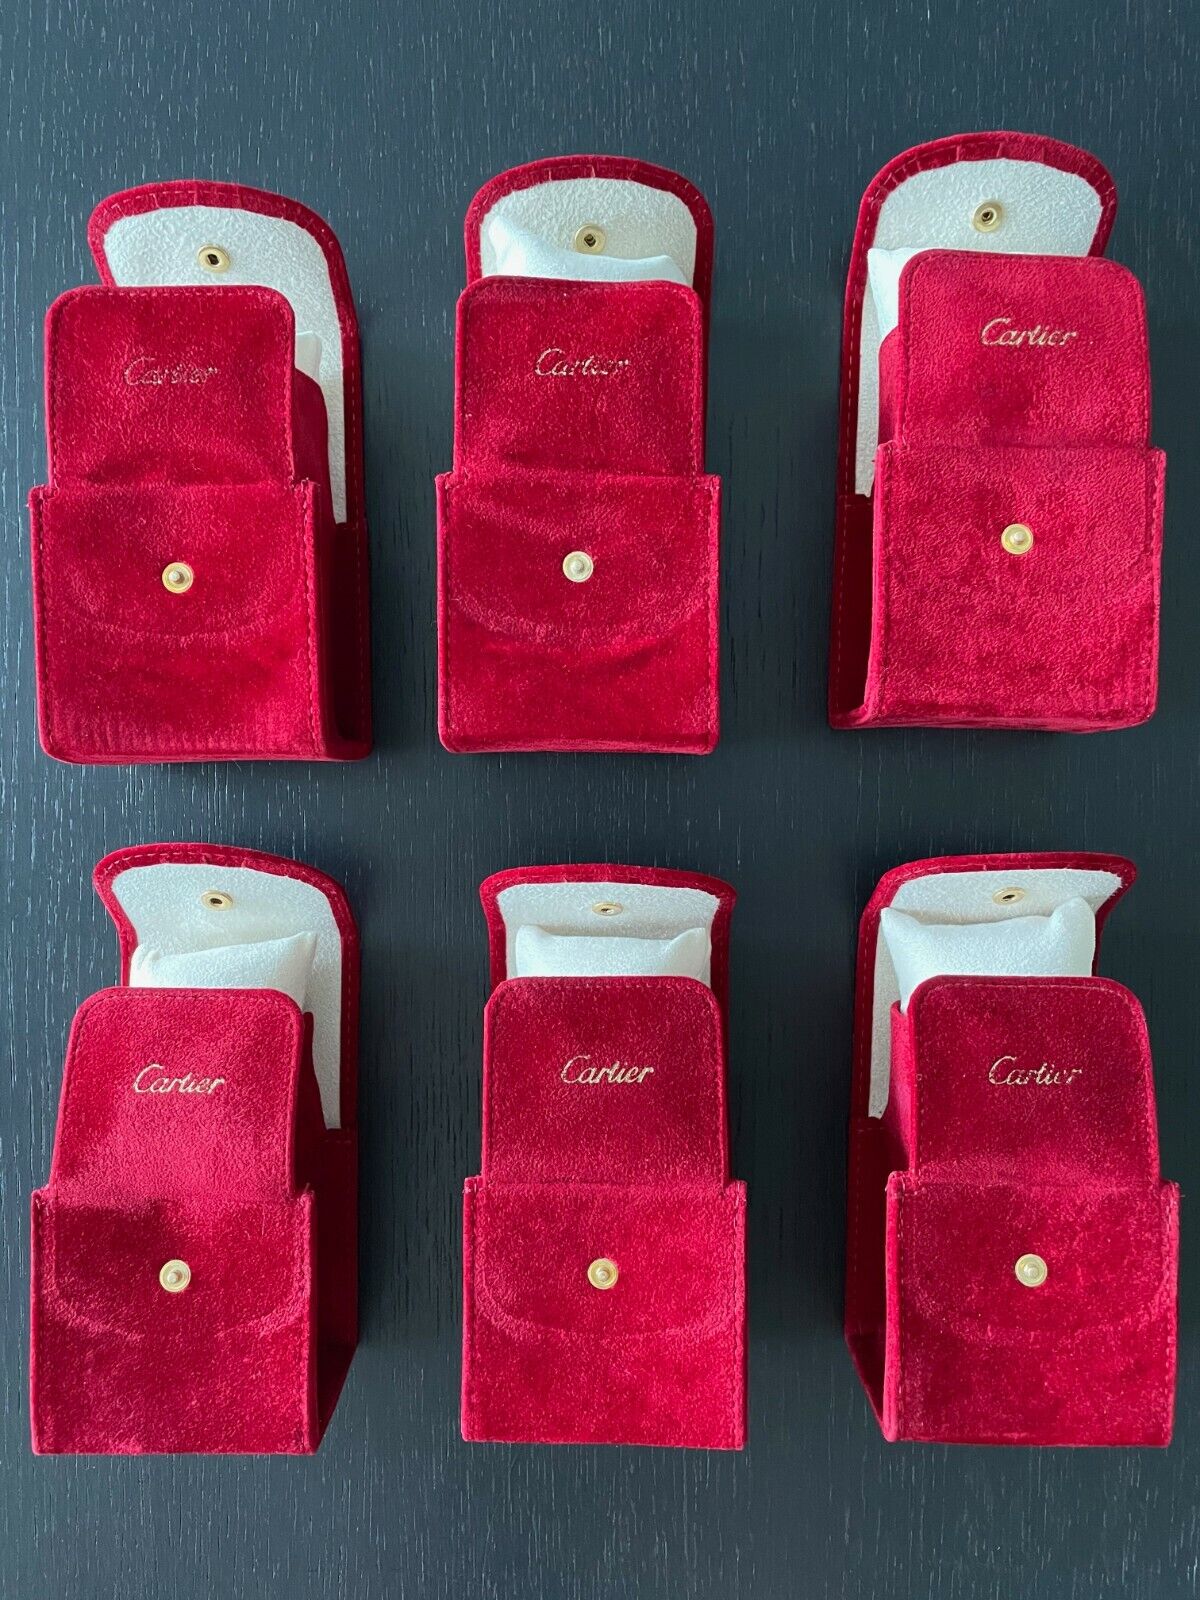 Authentic CARTIER Suede Travel Watch Cases - Pillow Jewelry Pouch x 6 pre-owned Cartier